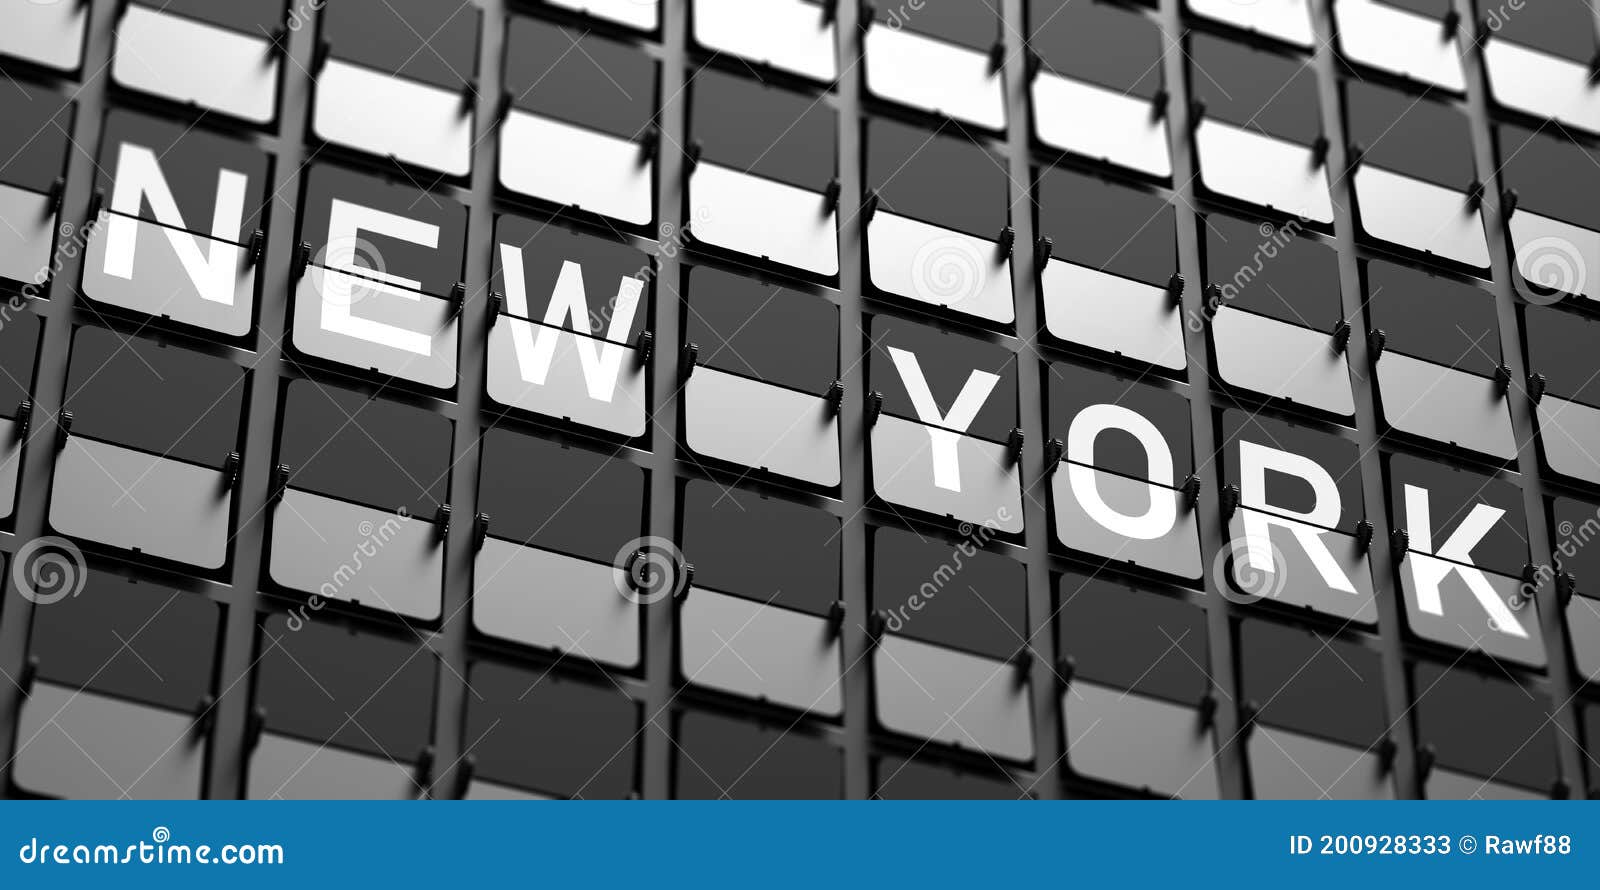 new york city, usa text. split flap airport white letters on display, black background 3d 